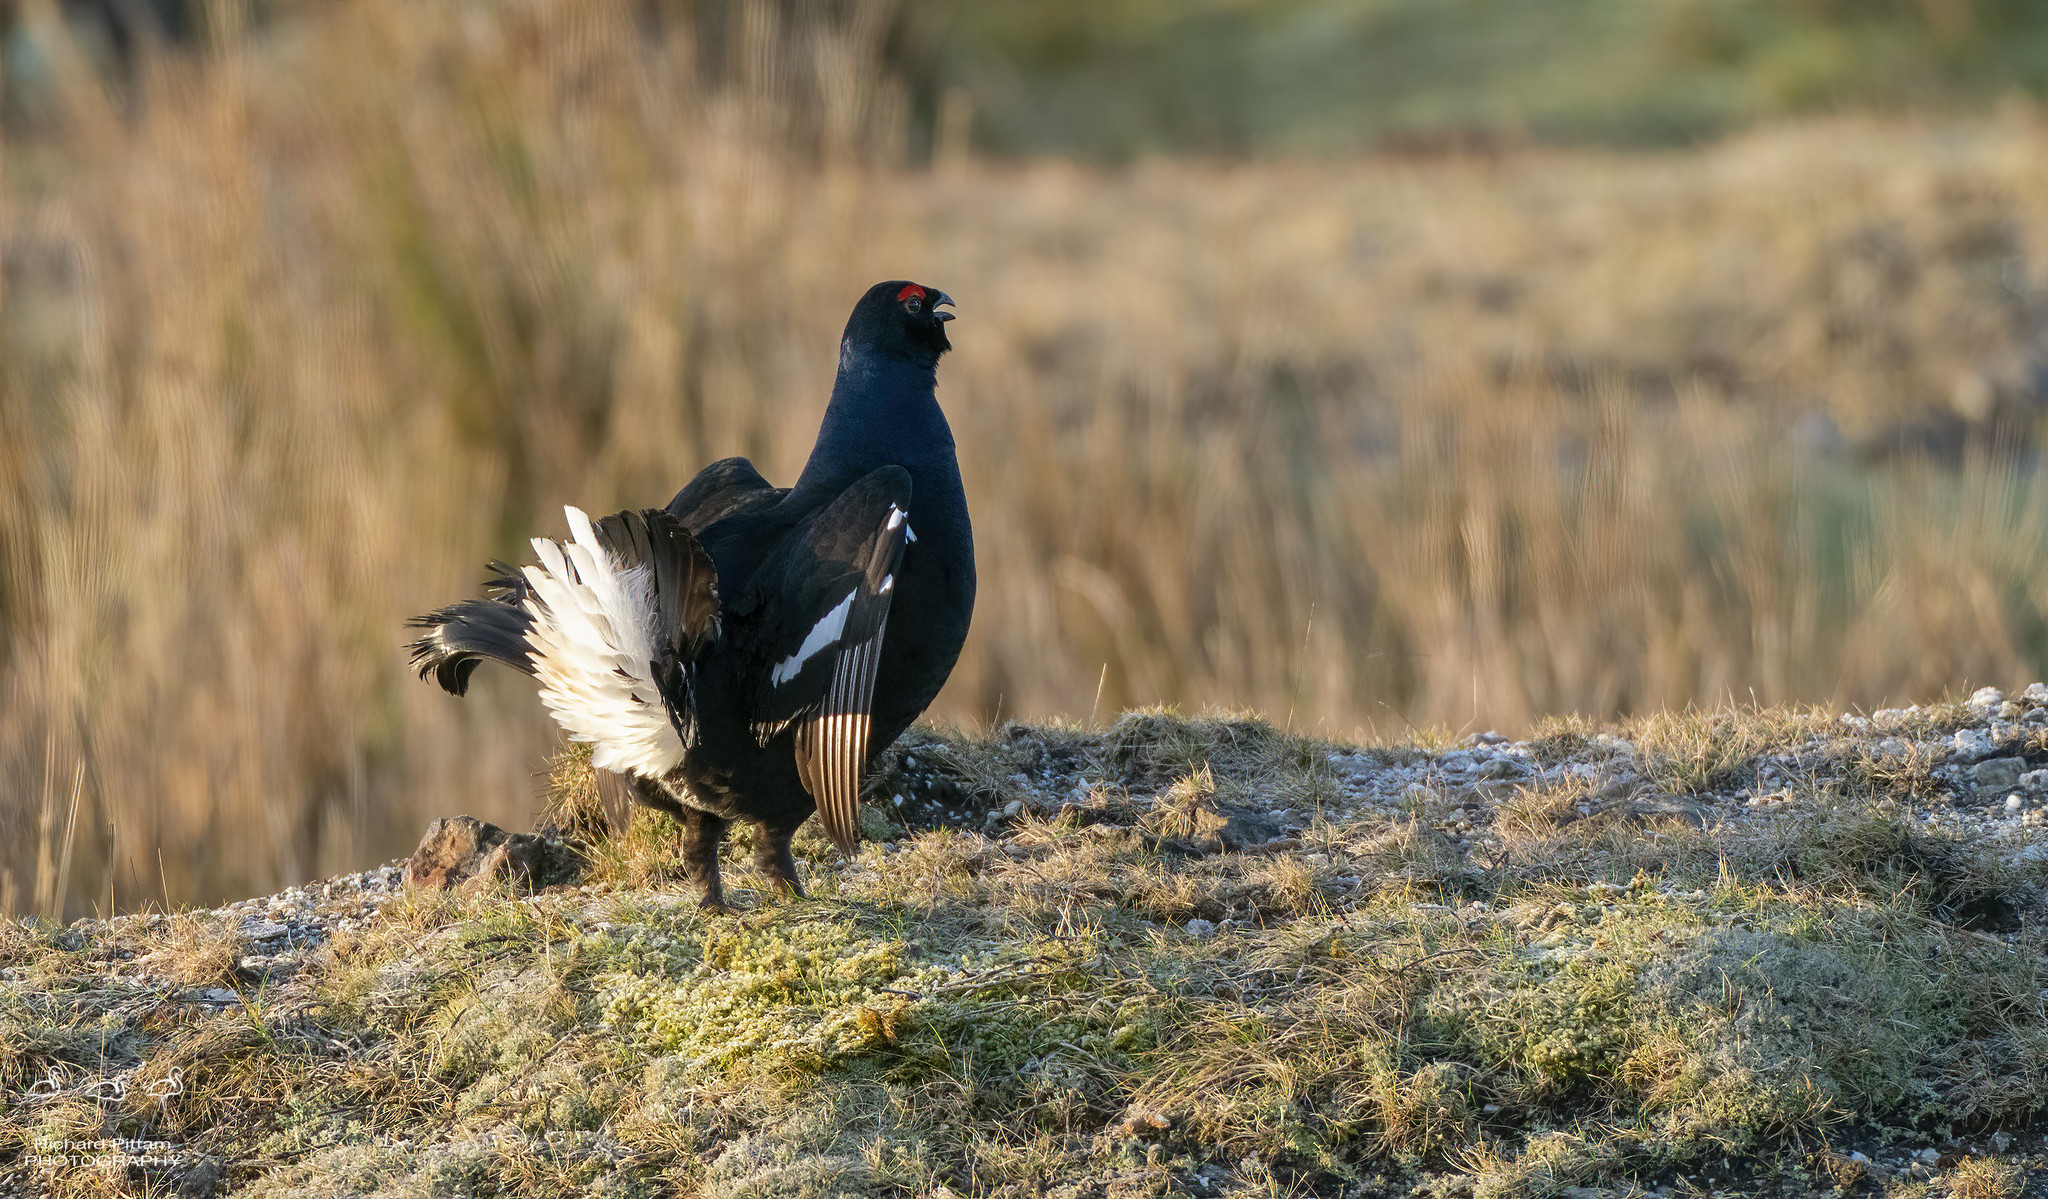 Black Grouse..... ordering a Dominos pizza.... :-(